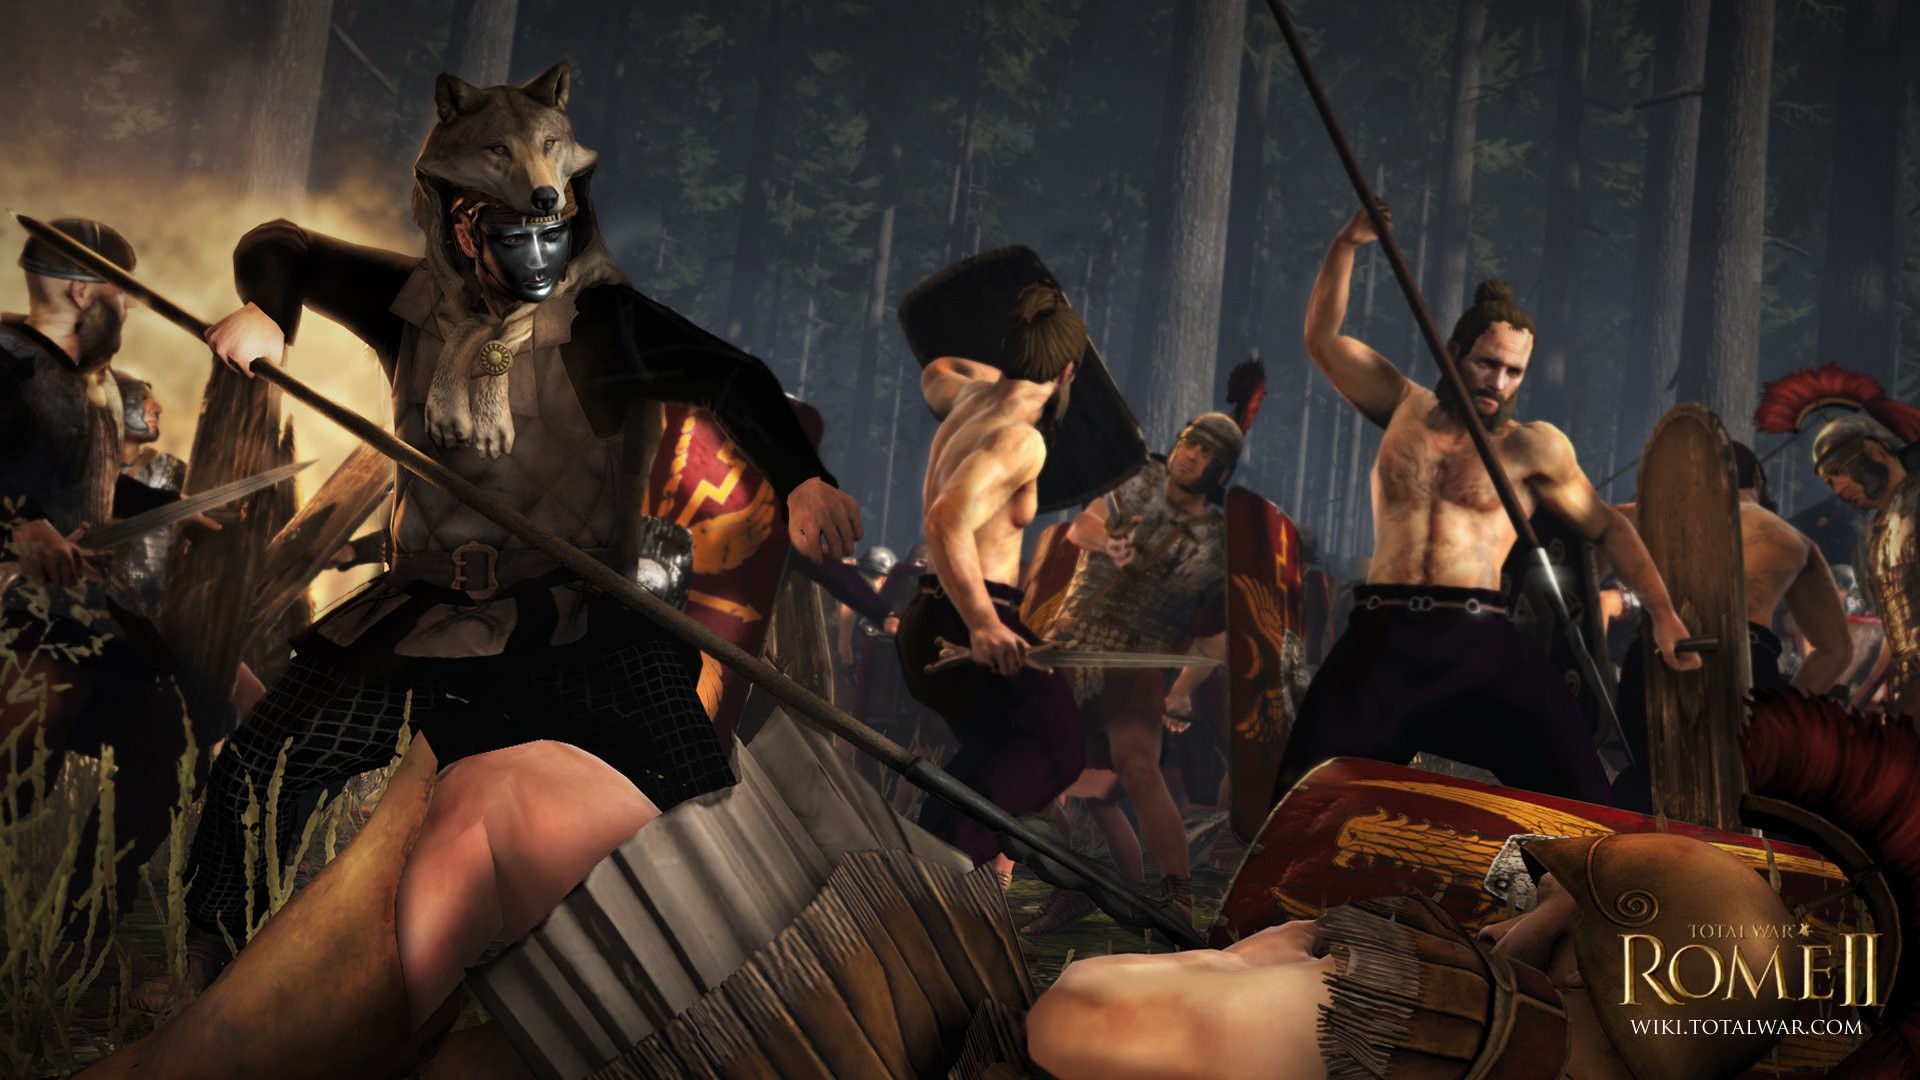 1920x1080 The Total War Humble Bundle Is Decent, Provided You Go All The Way